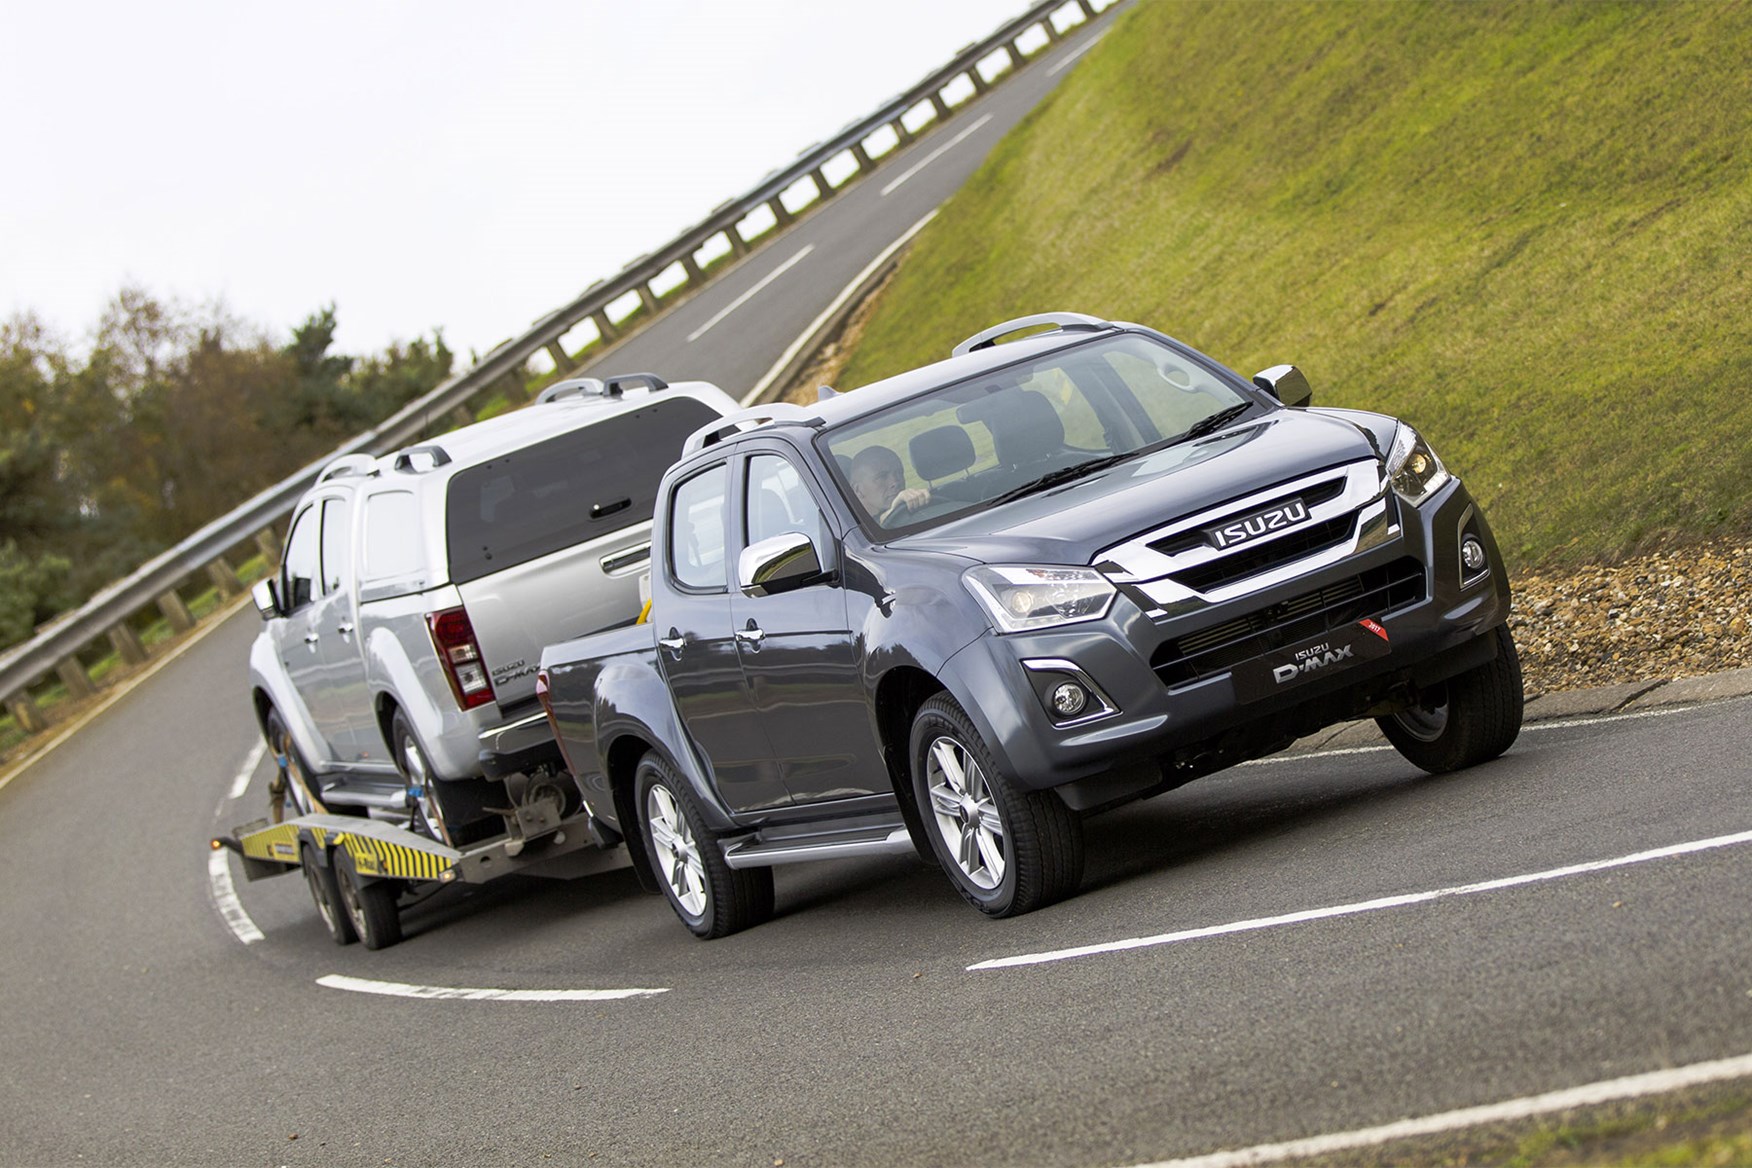 Isuzu D-Max payload capacity, kerb weight and gross vehicle weight (GVW) - towing another D-Max on a trailer